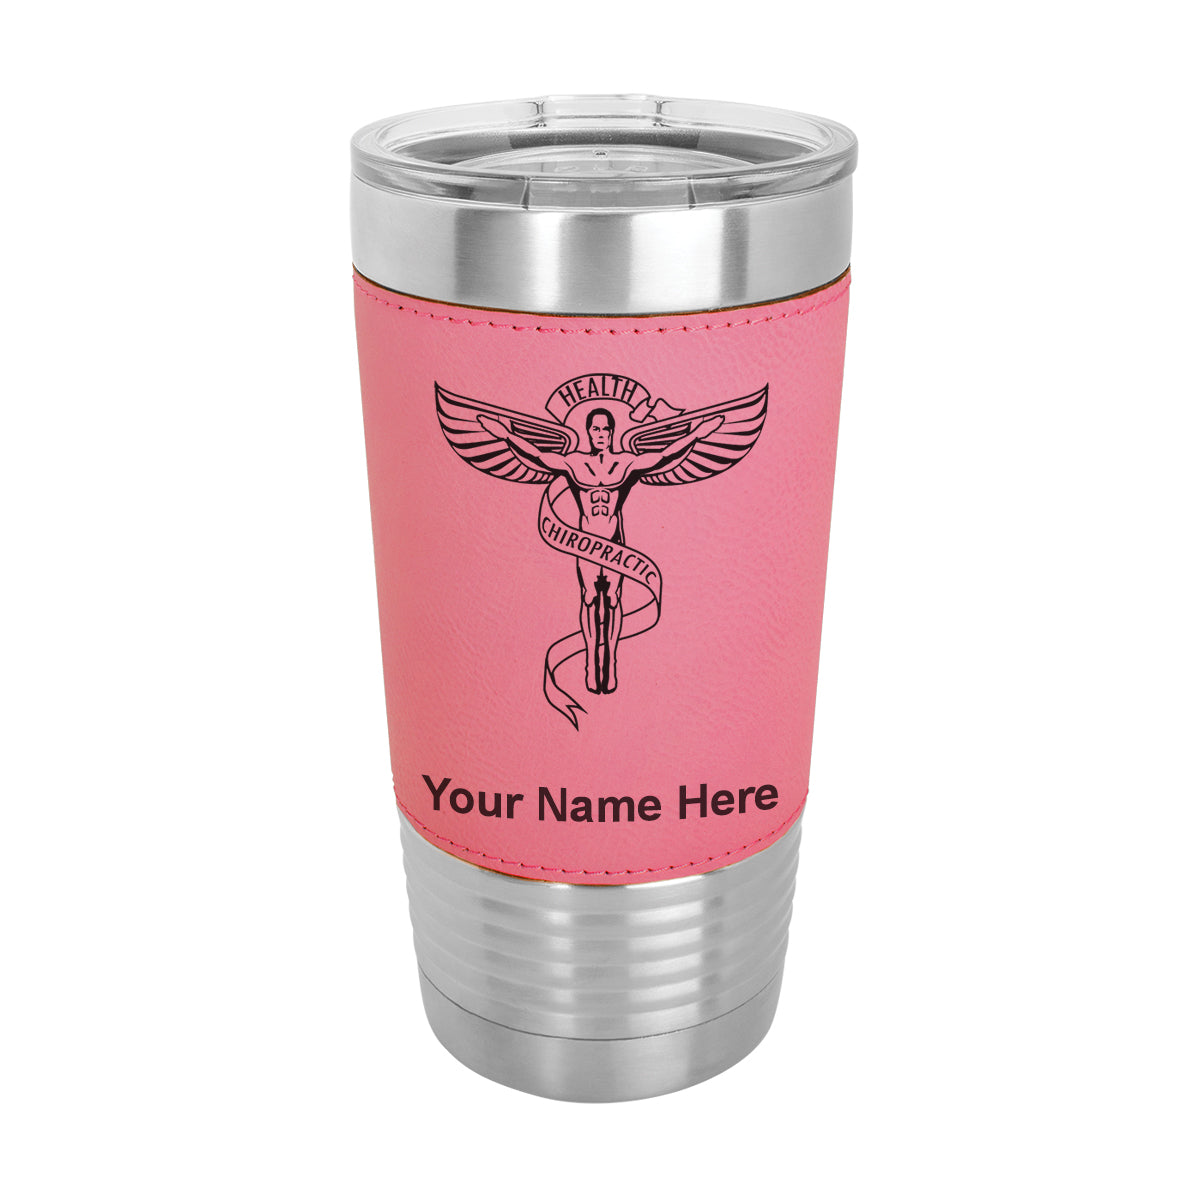 20oz Faux Leather Tumbler Mug, Chiropractic Symbol, Personalized Engraving Included - LaserGram Custom Engraved Gifts